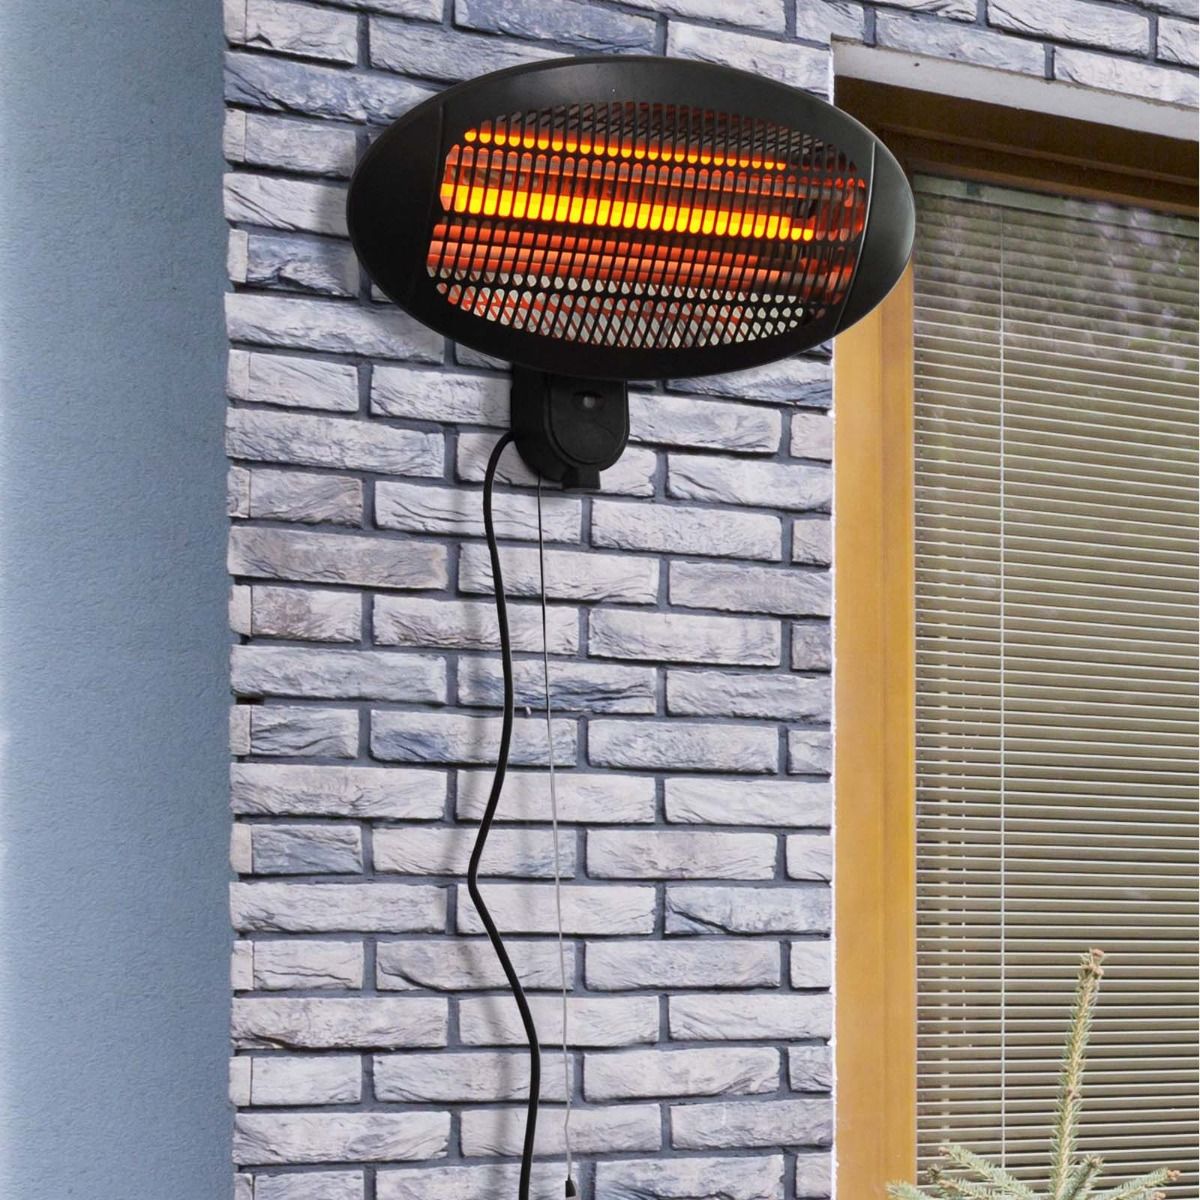 Outsunny Wall Mounted Infared Electric Patio Heater, 2kW - Black